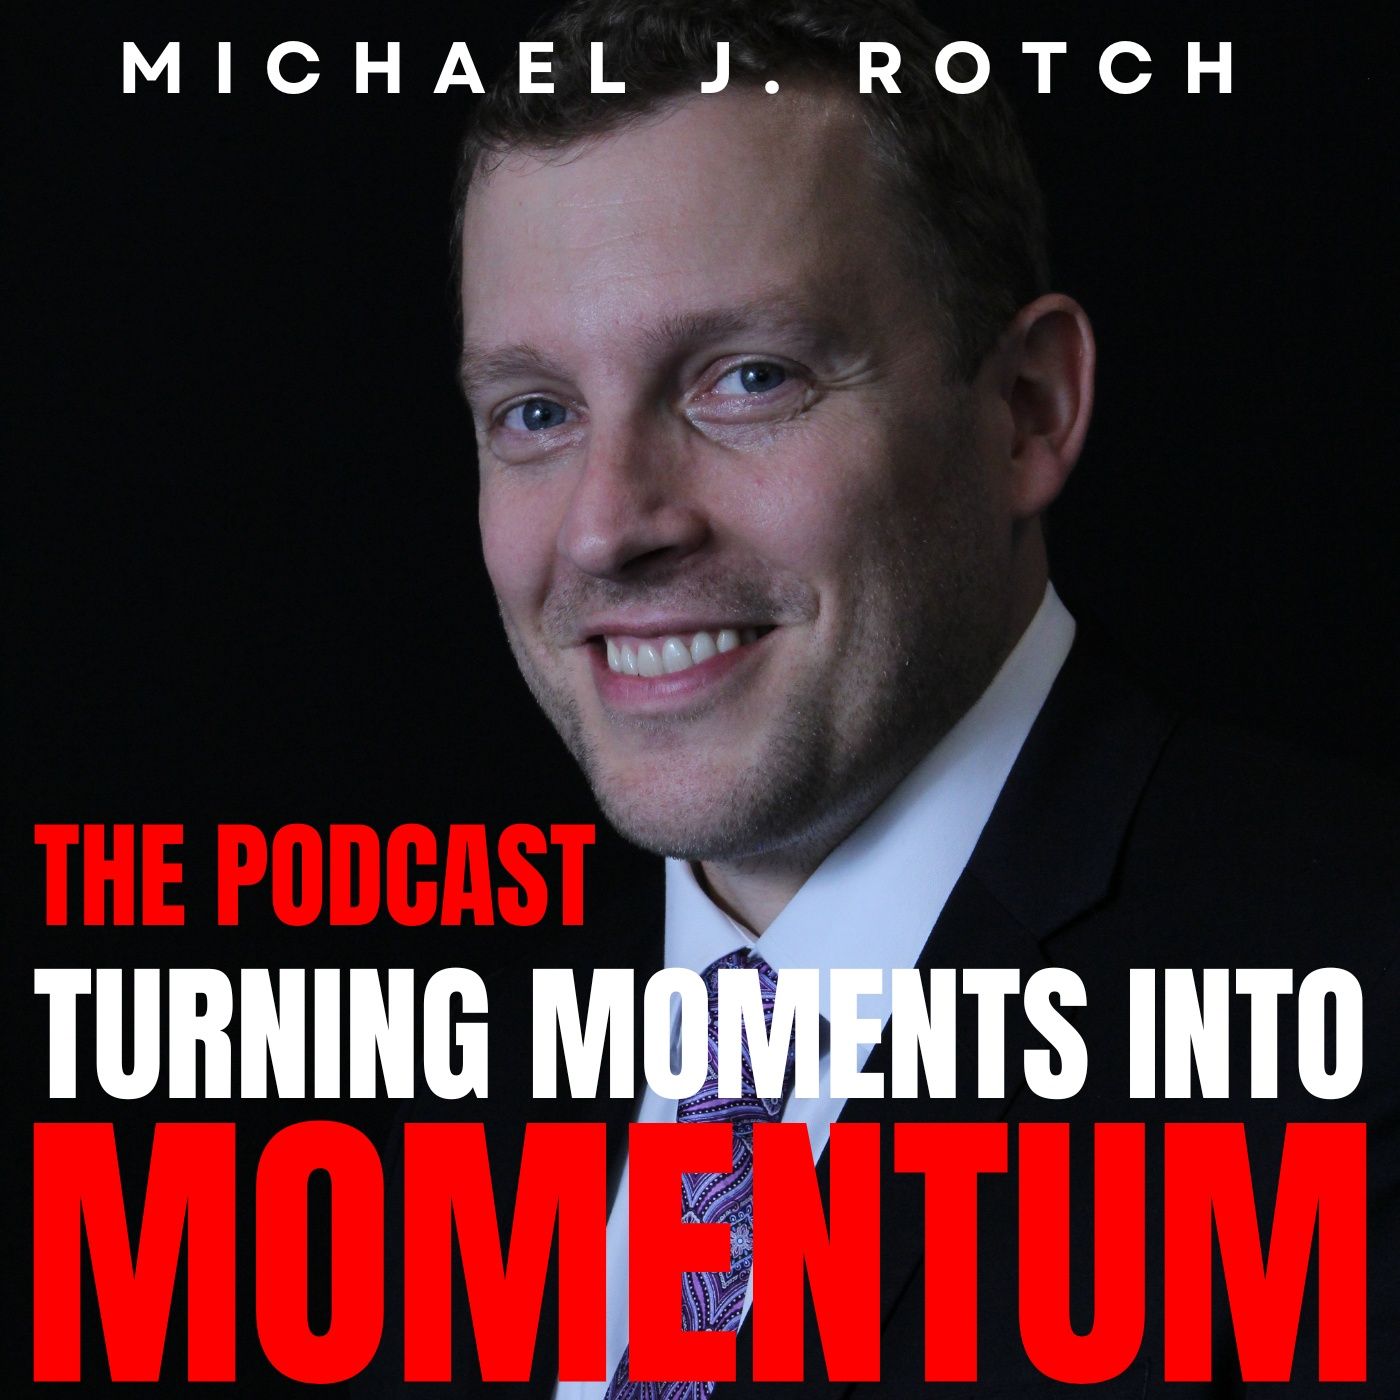 Turning Moments Into momentum (Ep 3108) - You are closer than you think you are